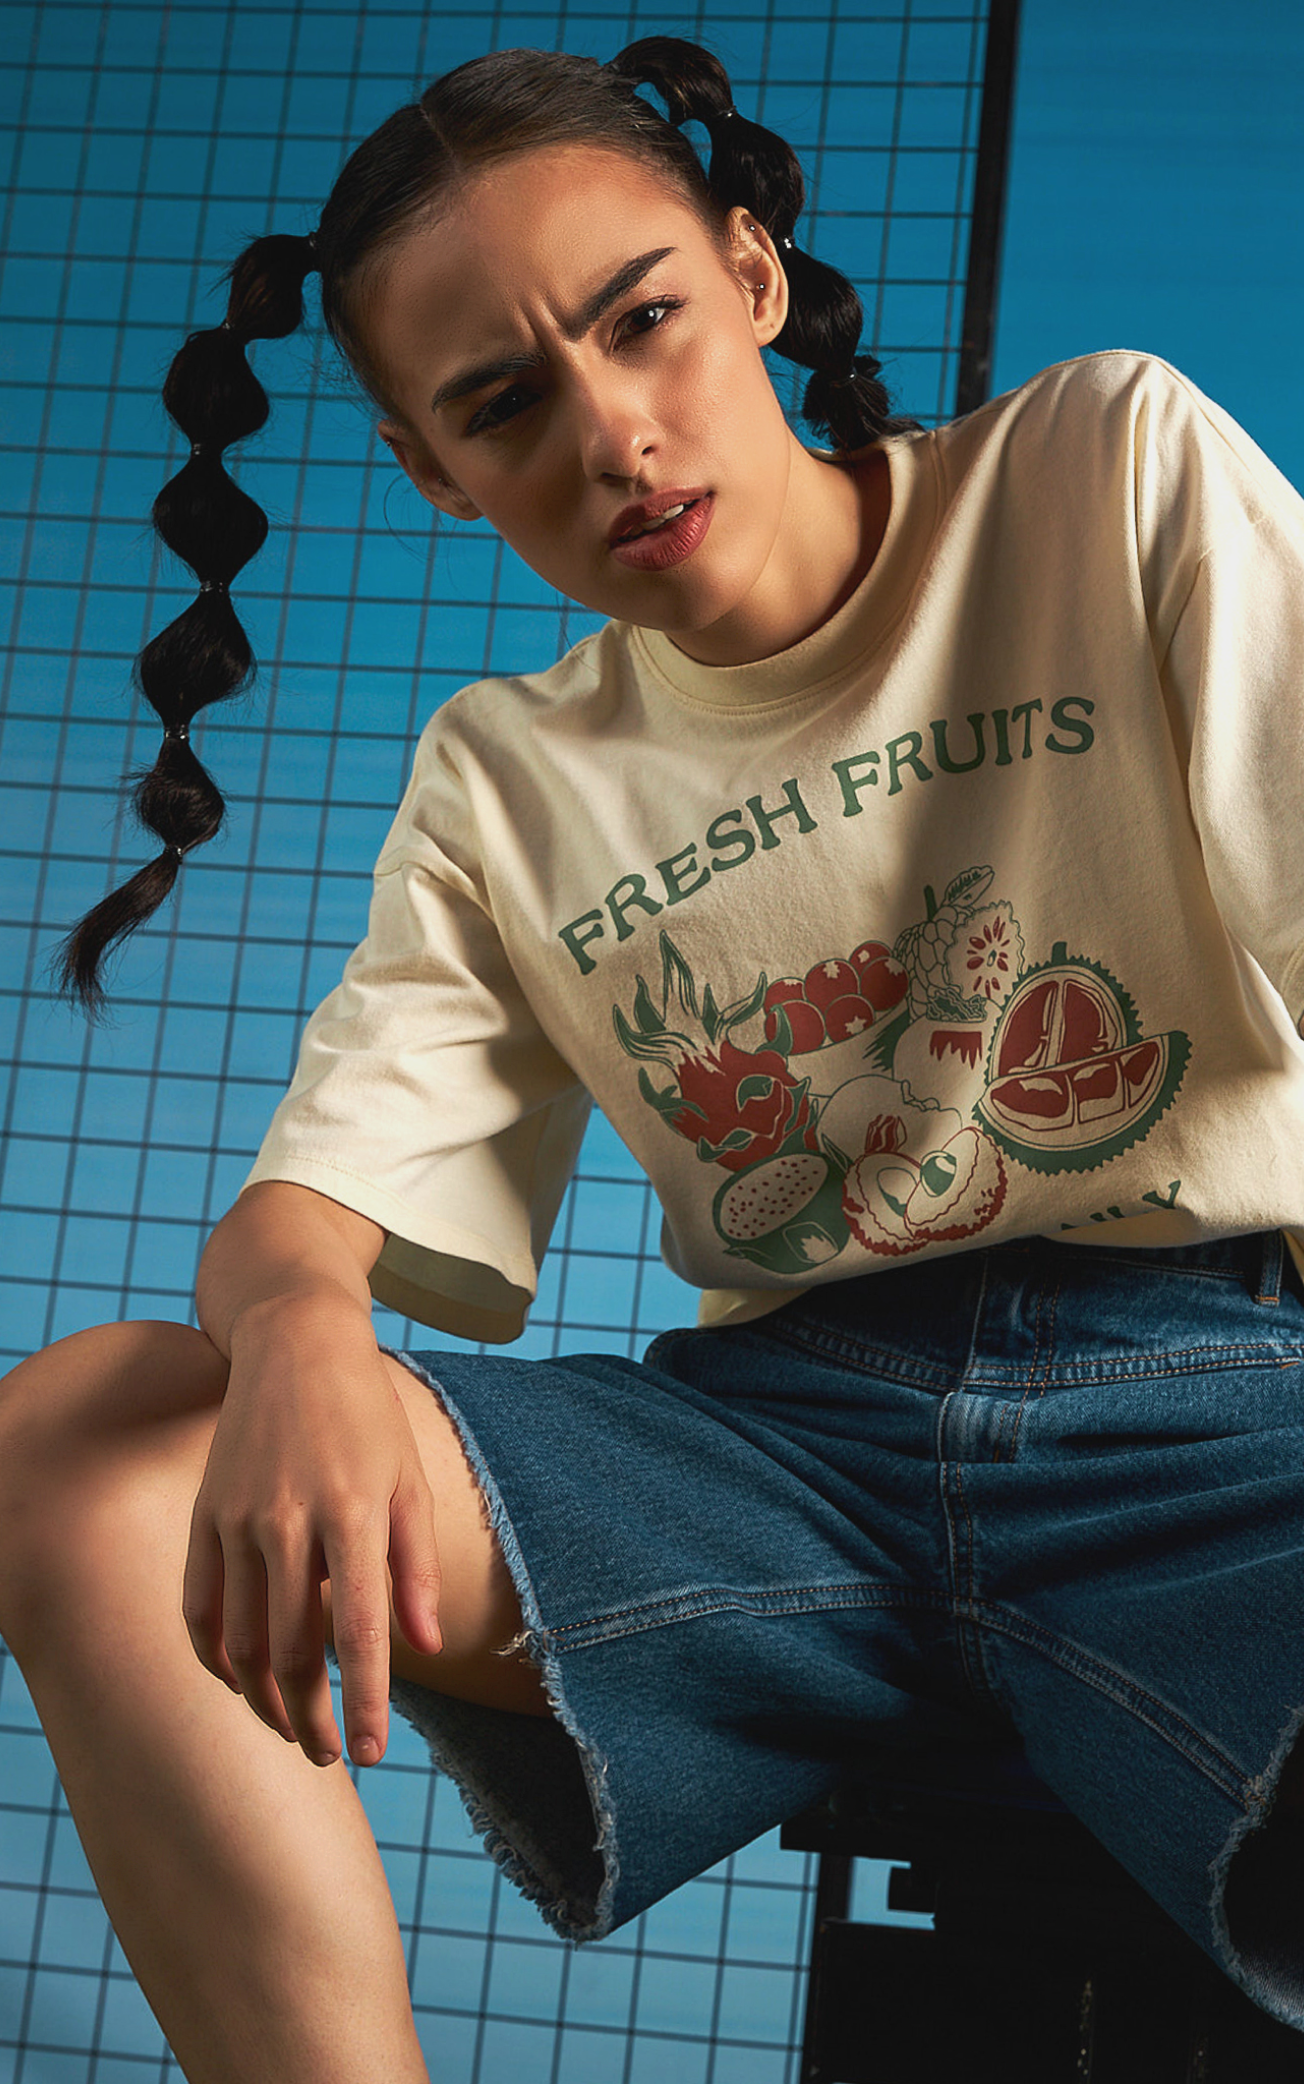 FRESH FRUITS GRAPHIC OVERSIZED FIT TEE